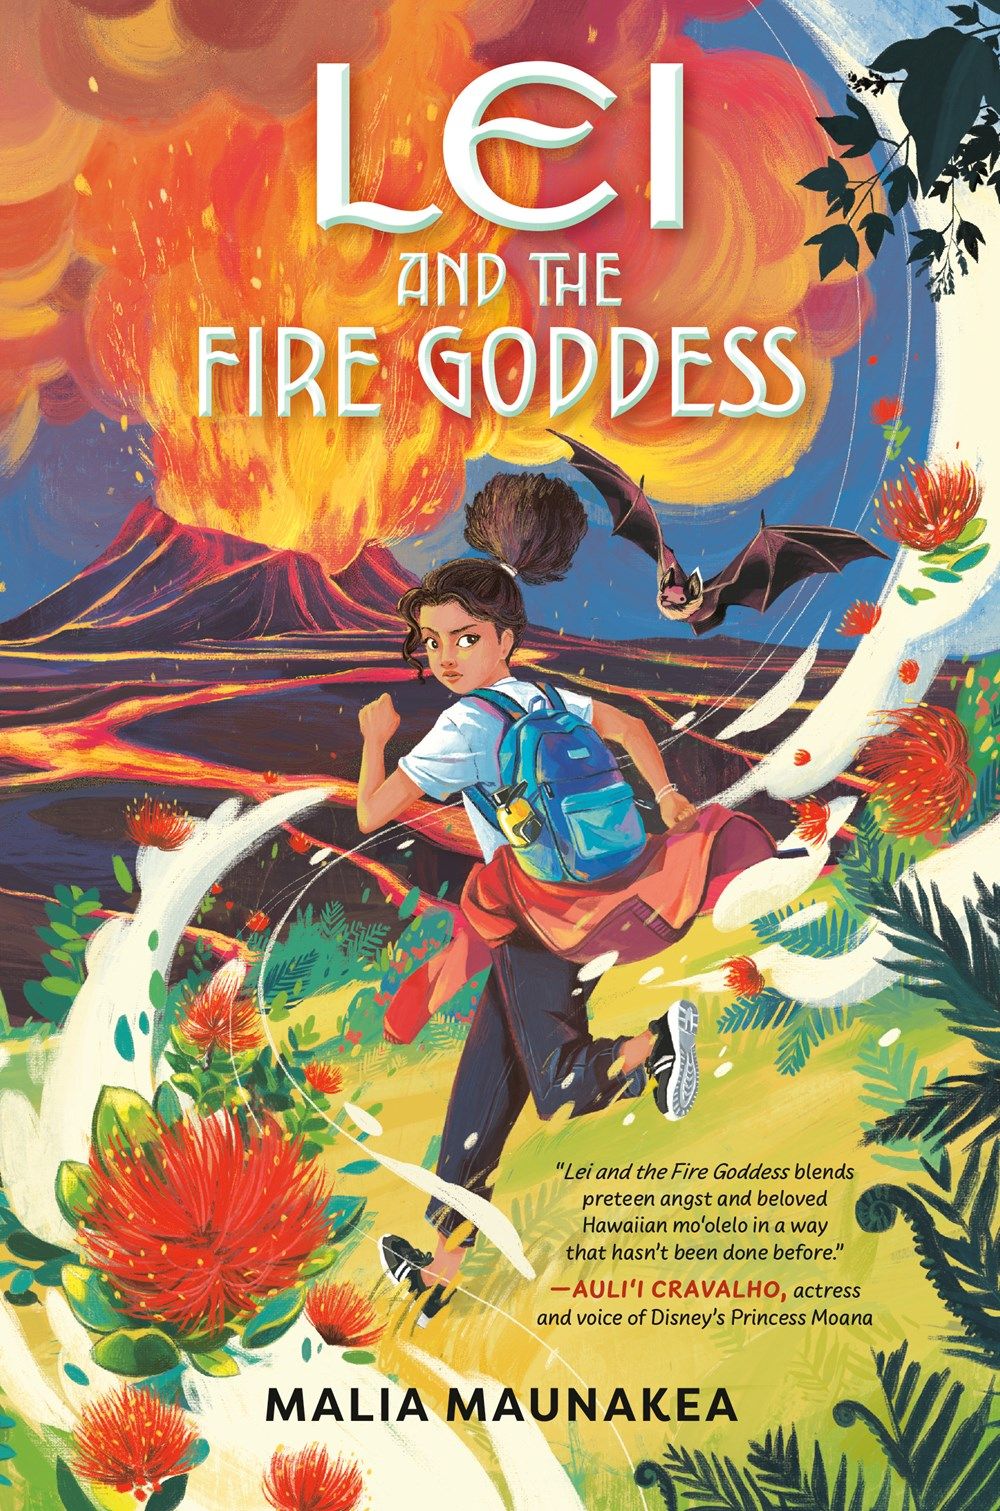 Cover of Lei and the Fire Goddess by Maunakea